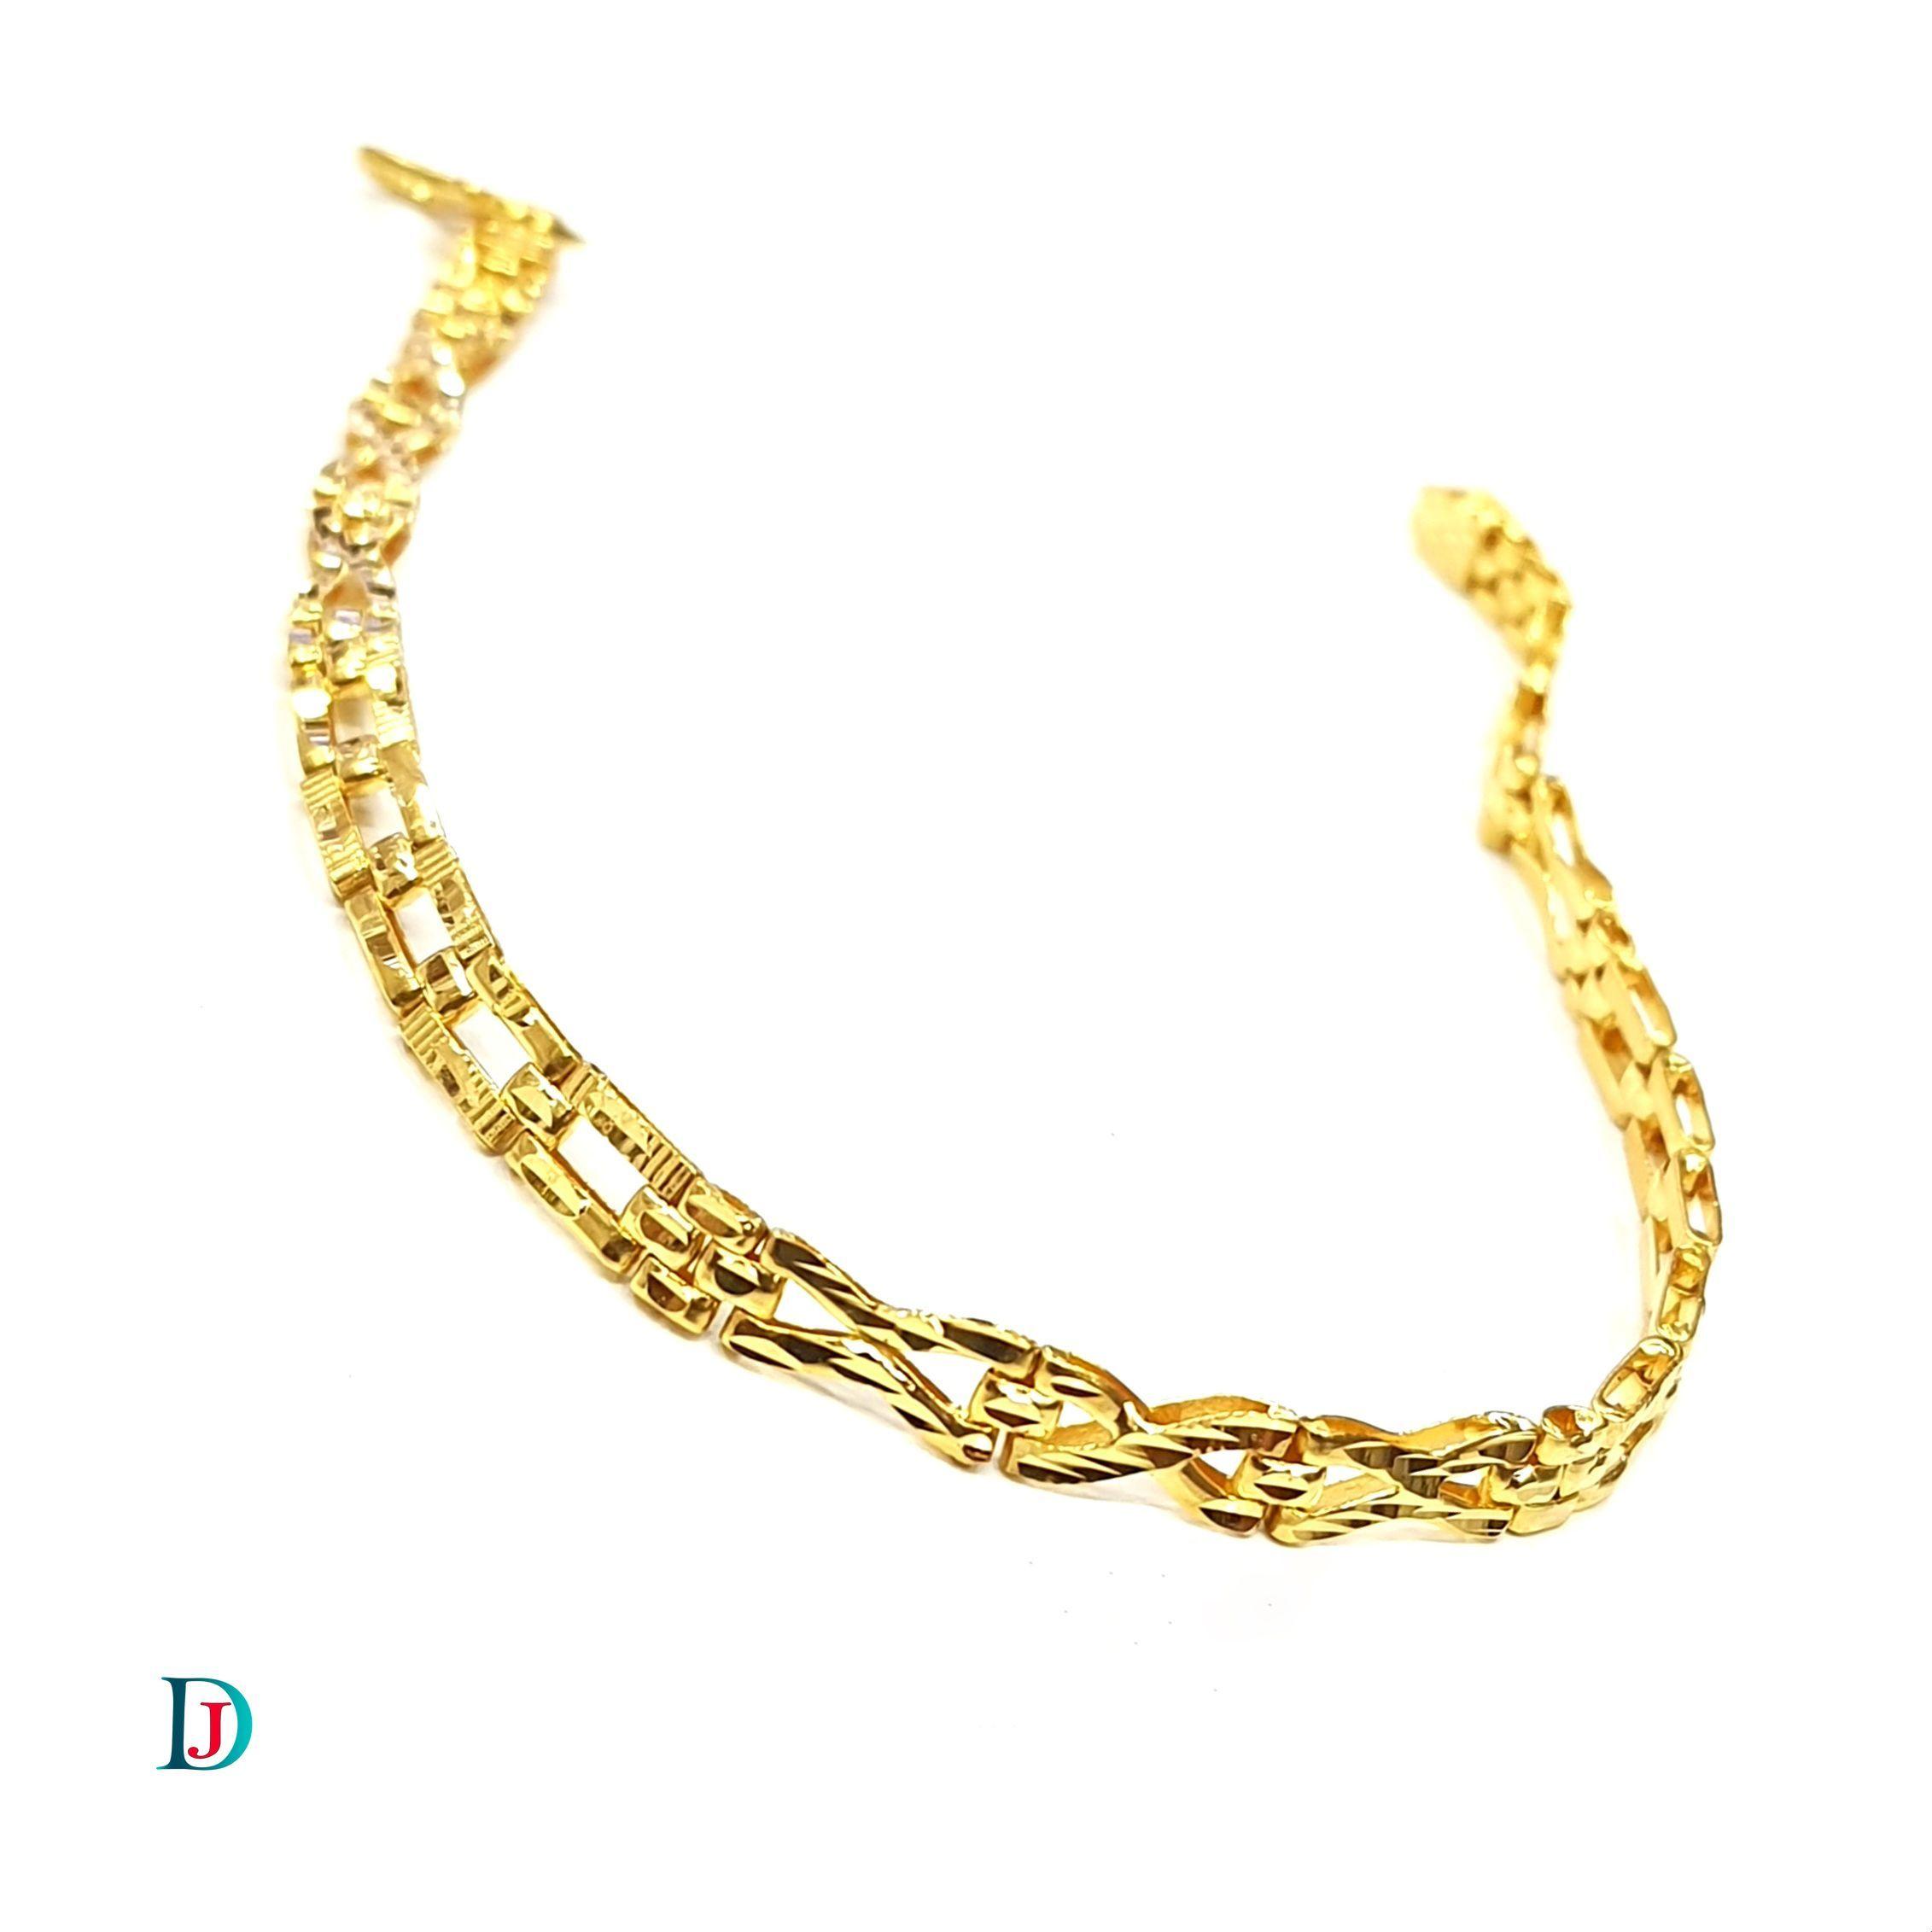 New and Latest Design of Desi Indian Rajasthani Gold Chain 